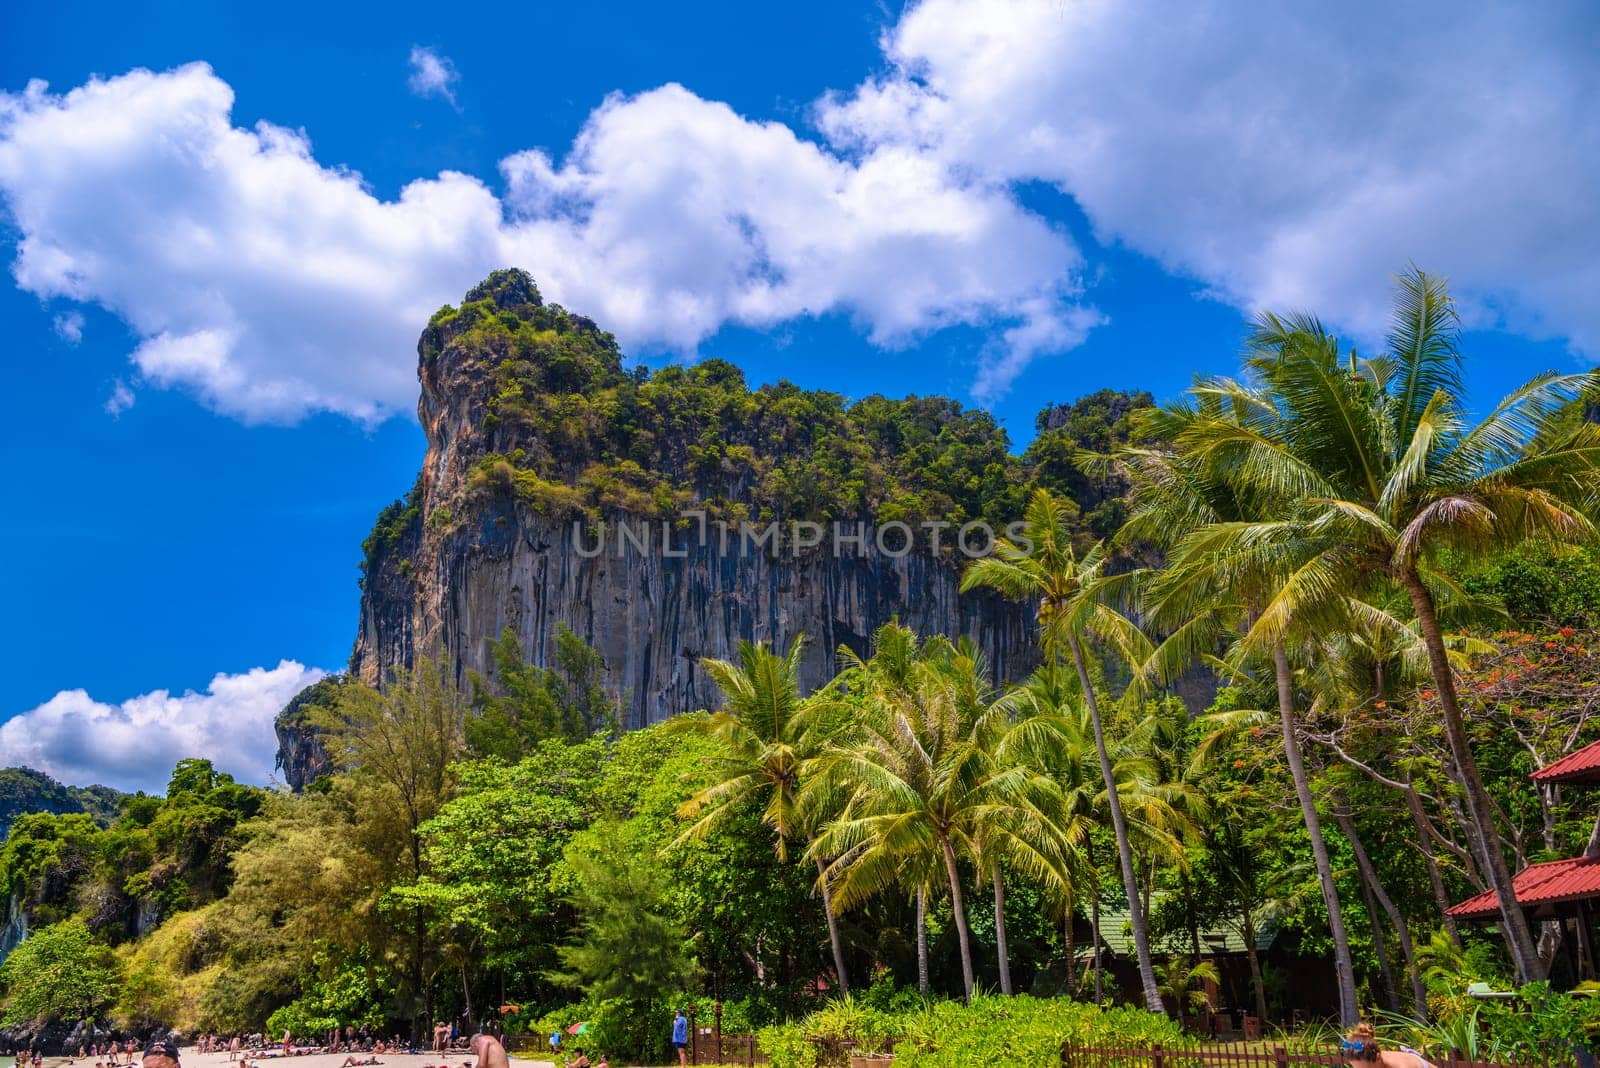 Rocks and cliffs, water and coconut palms, Railay beach west, Ao Nang, Krabi, Thailand by Eagle2308